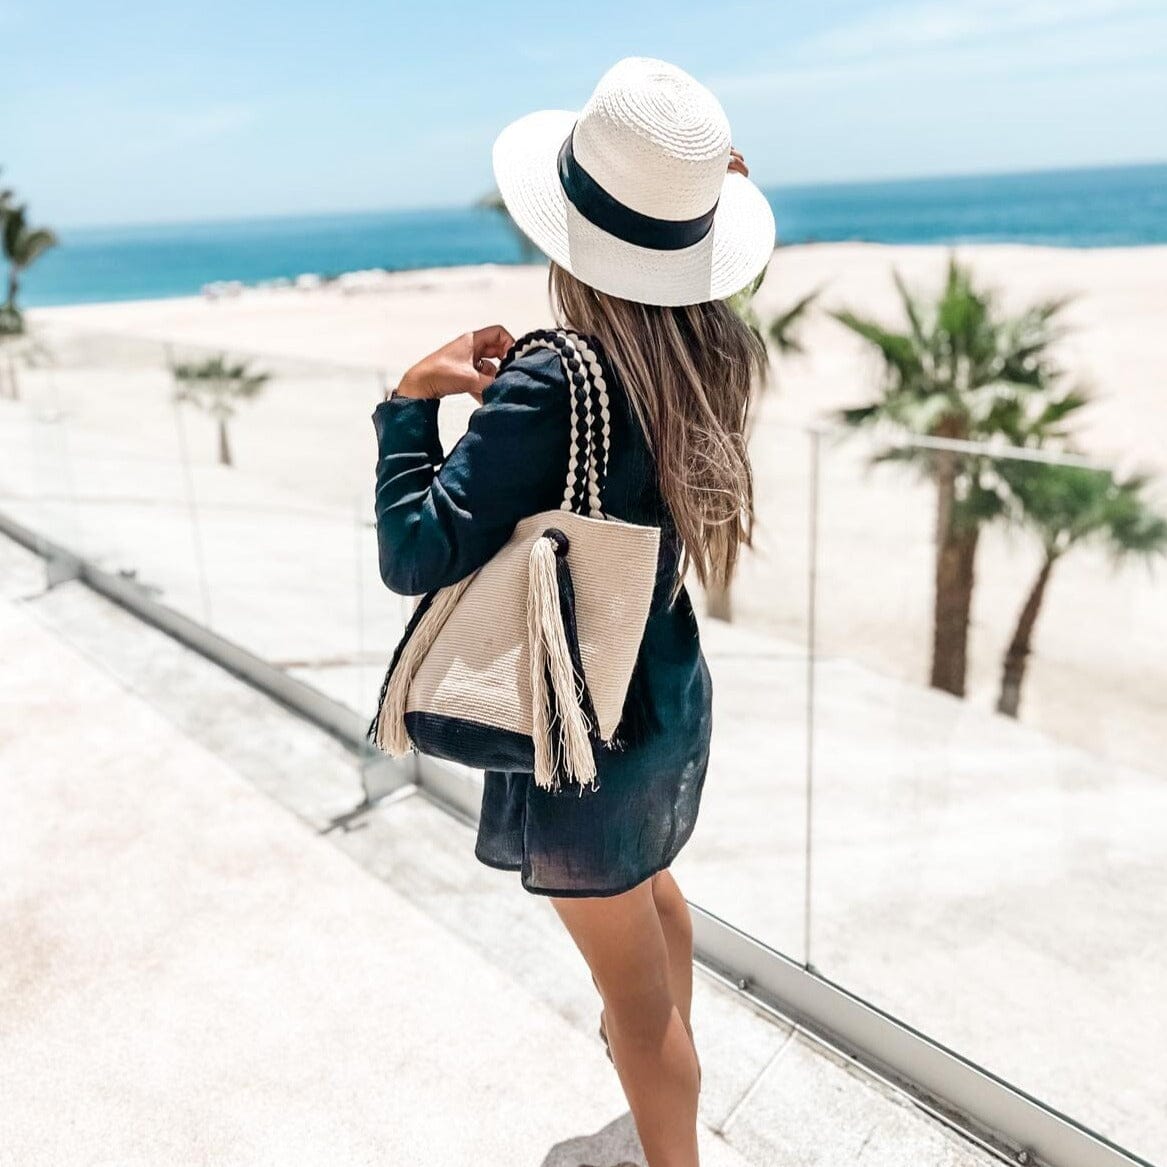 Best Summer Tote Beach Bags | Trending Summer Tote Bags with Tassels White Sands - White